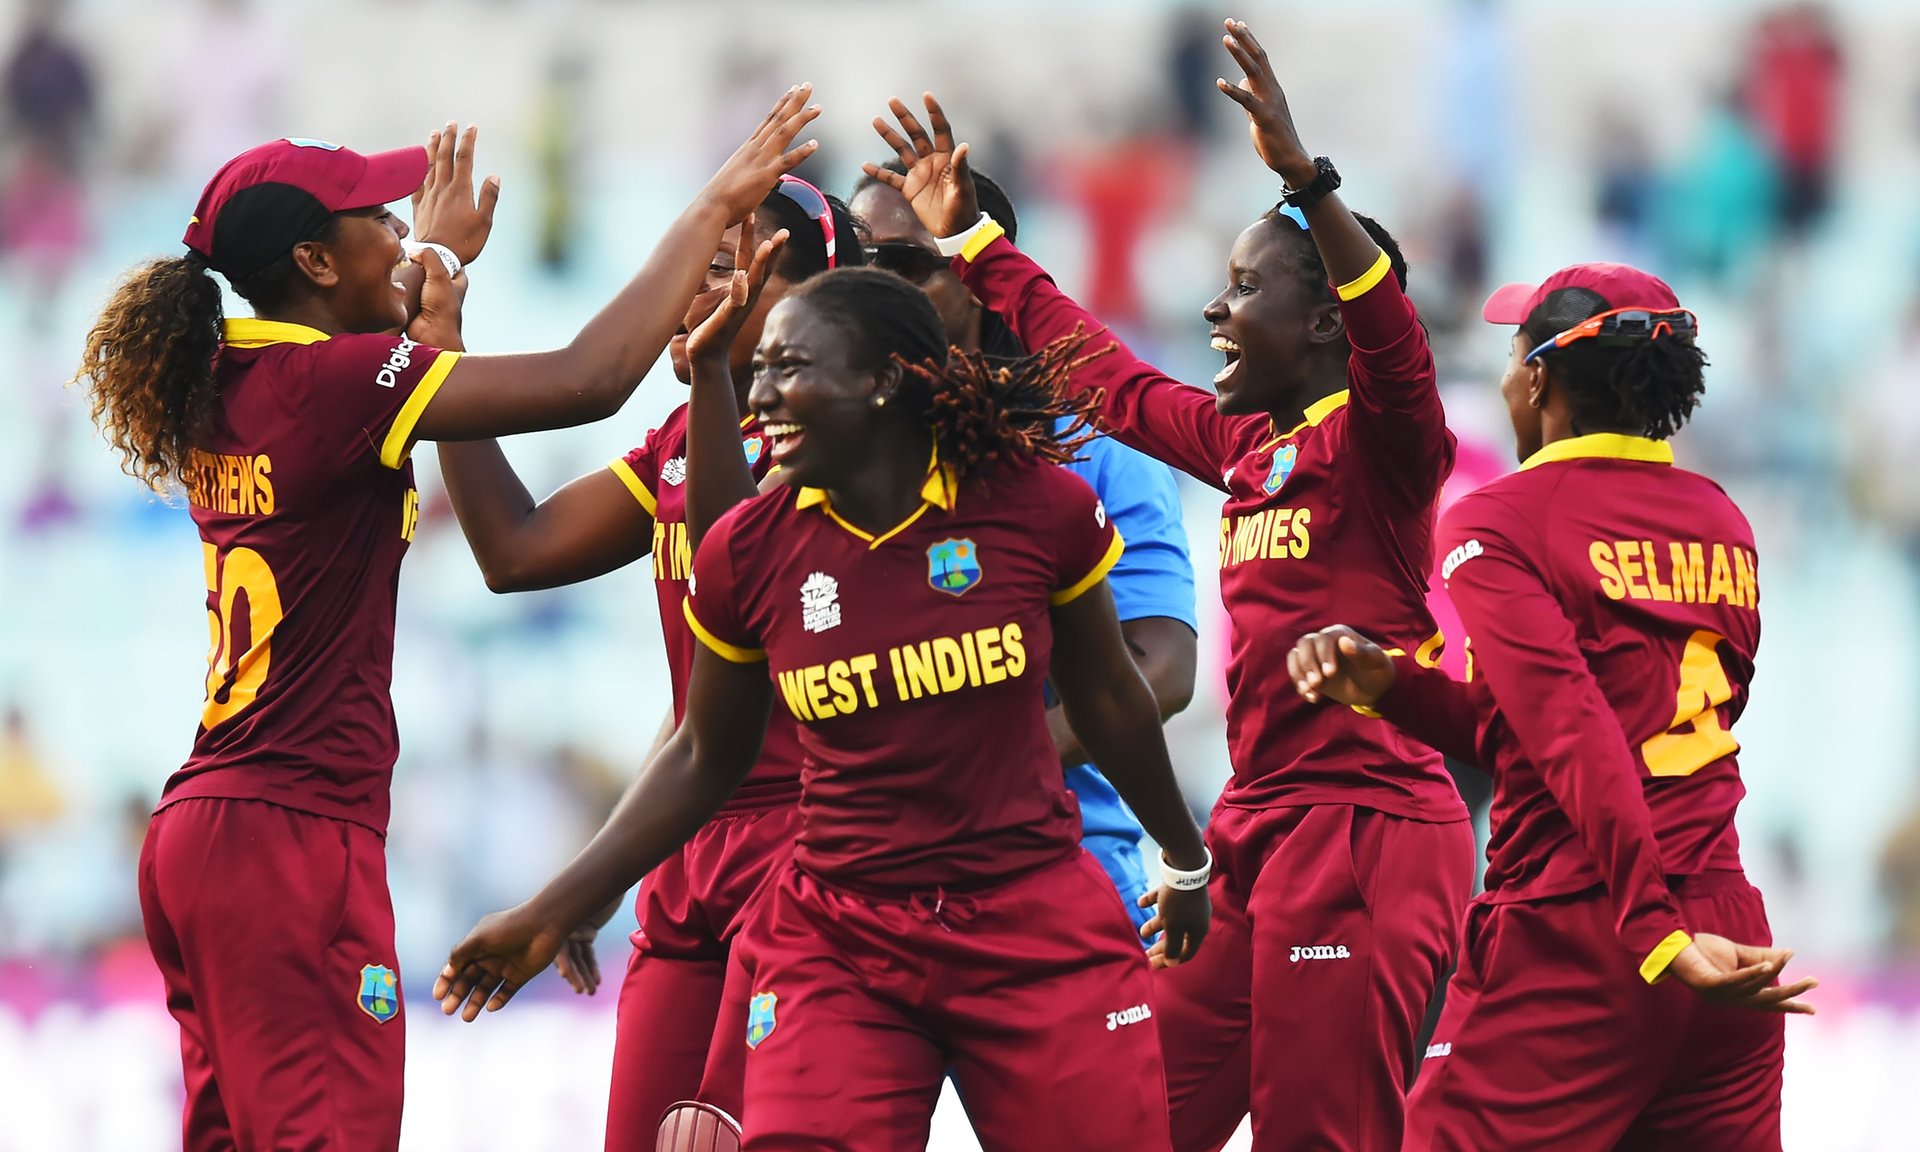 The West Indies chased down a record total to win their first women’s World Twenty20 crown in the final against Australia. Photo: Dibyangshu Sarkar/AFP/Getty Images